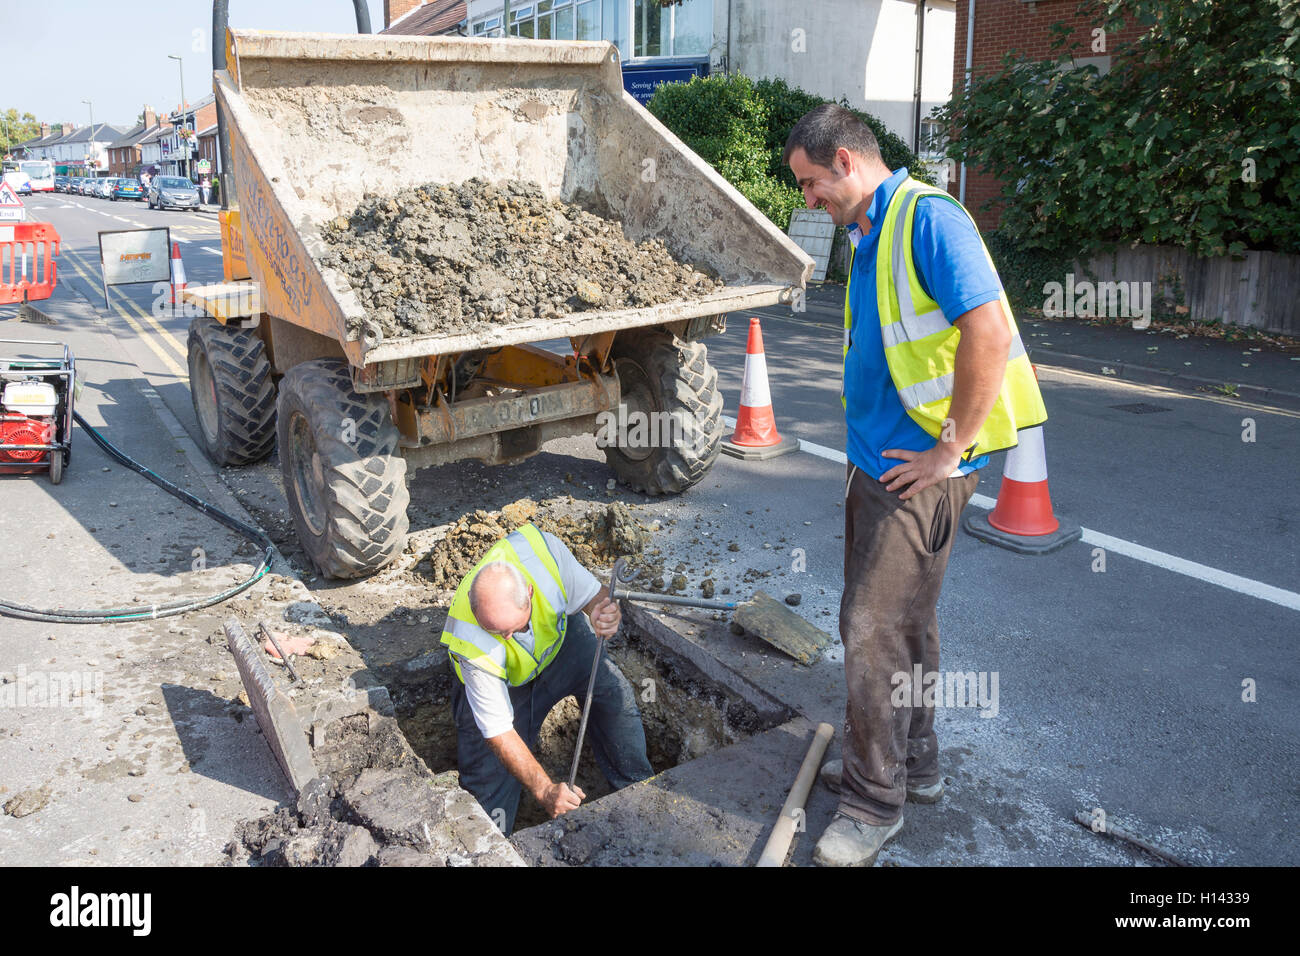 Road workers digging hole on street, St.Jude's Road, Englefield Green, Surrey, England, United Kingdom Stock Photo